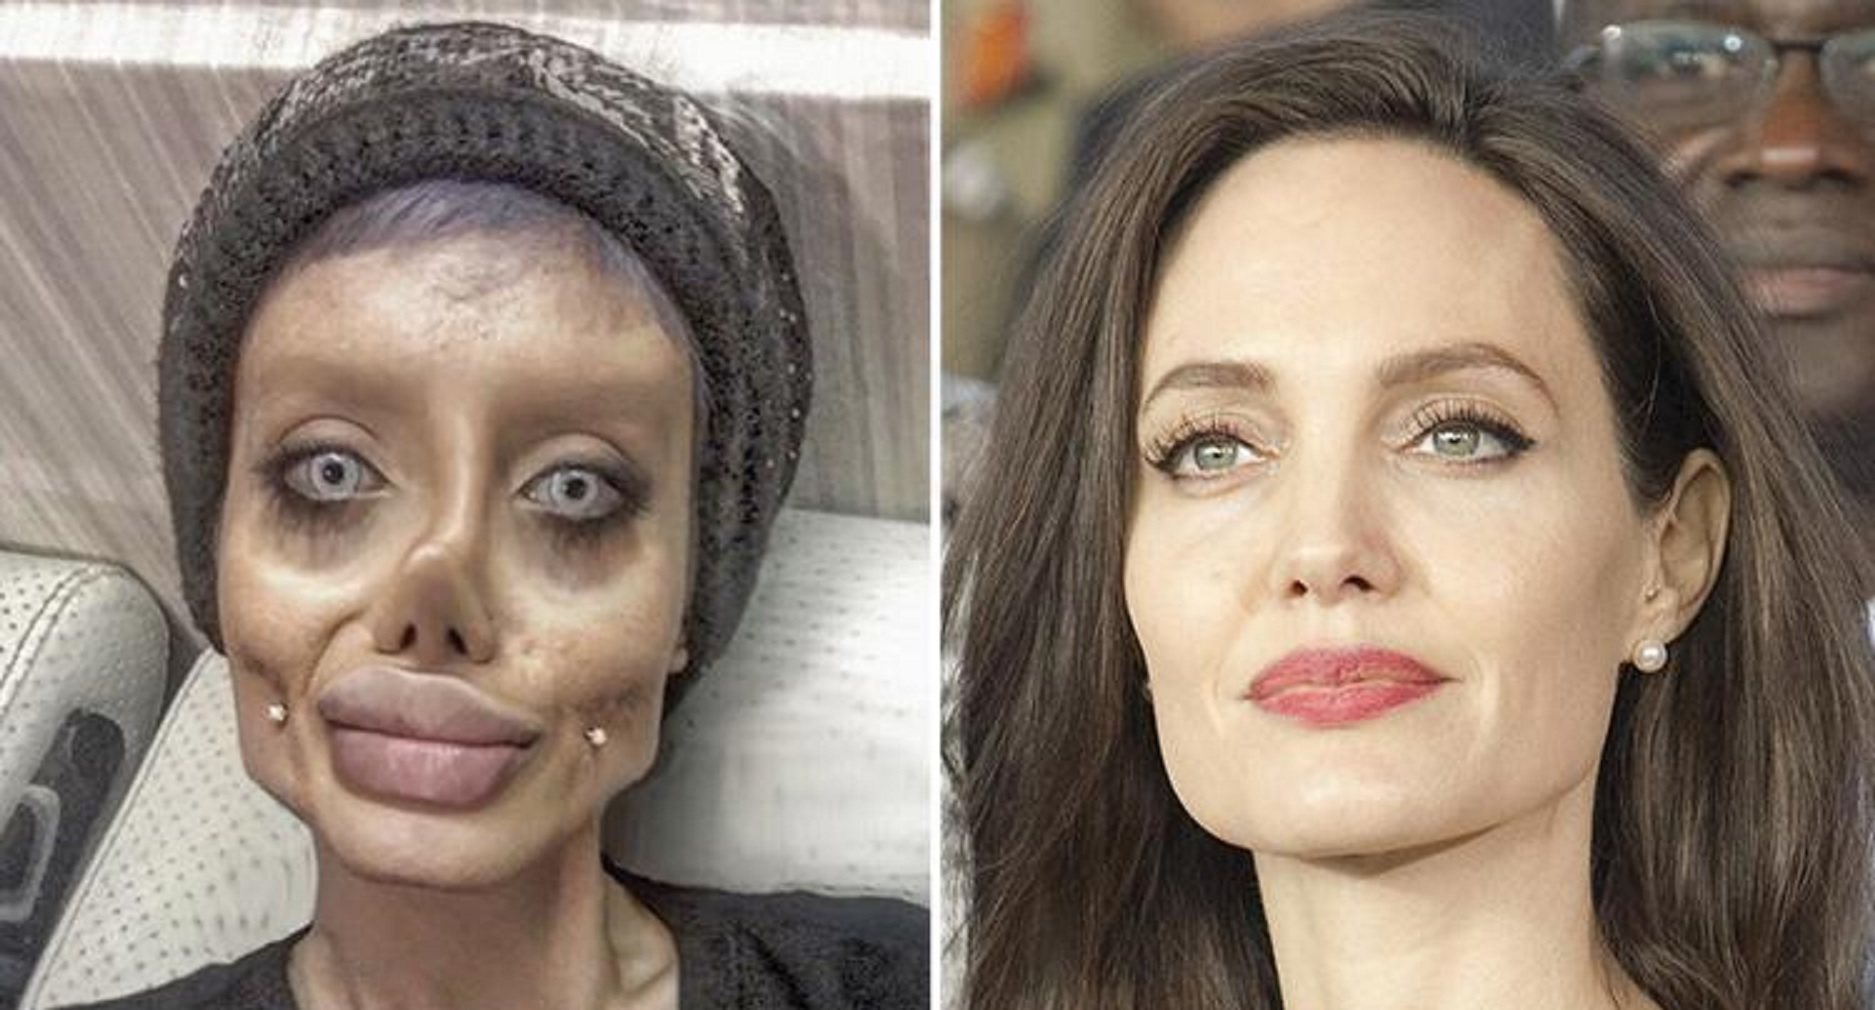 Woman undergoes 50 surgeries to look like Angelina Jolie. See pics of her drastic transformation.